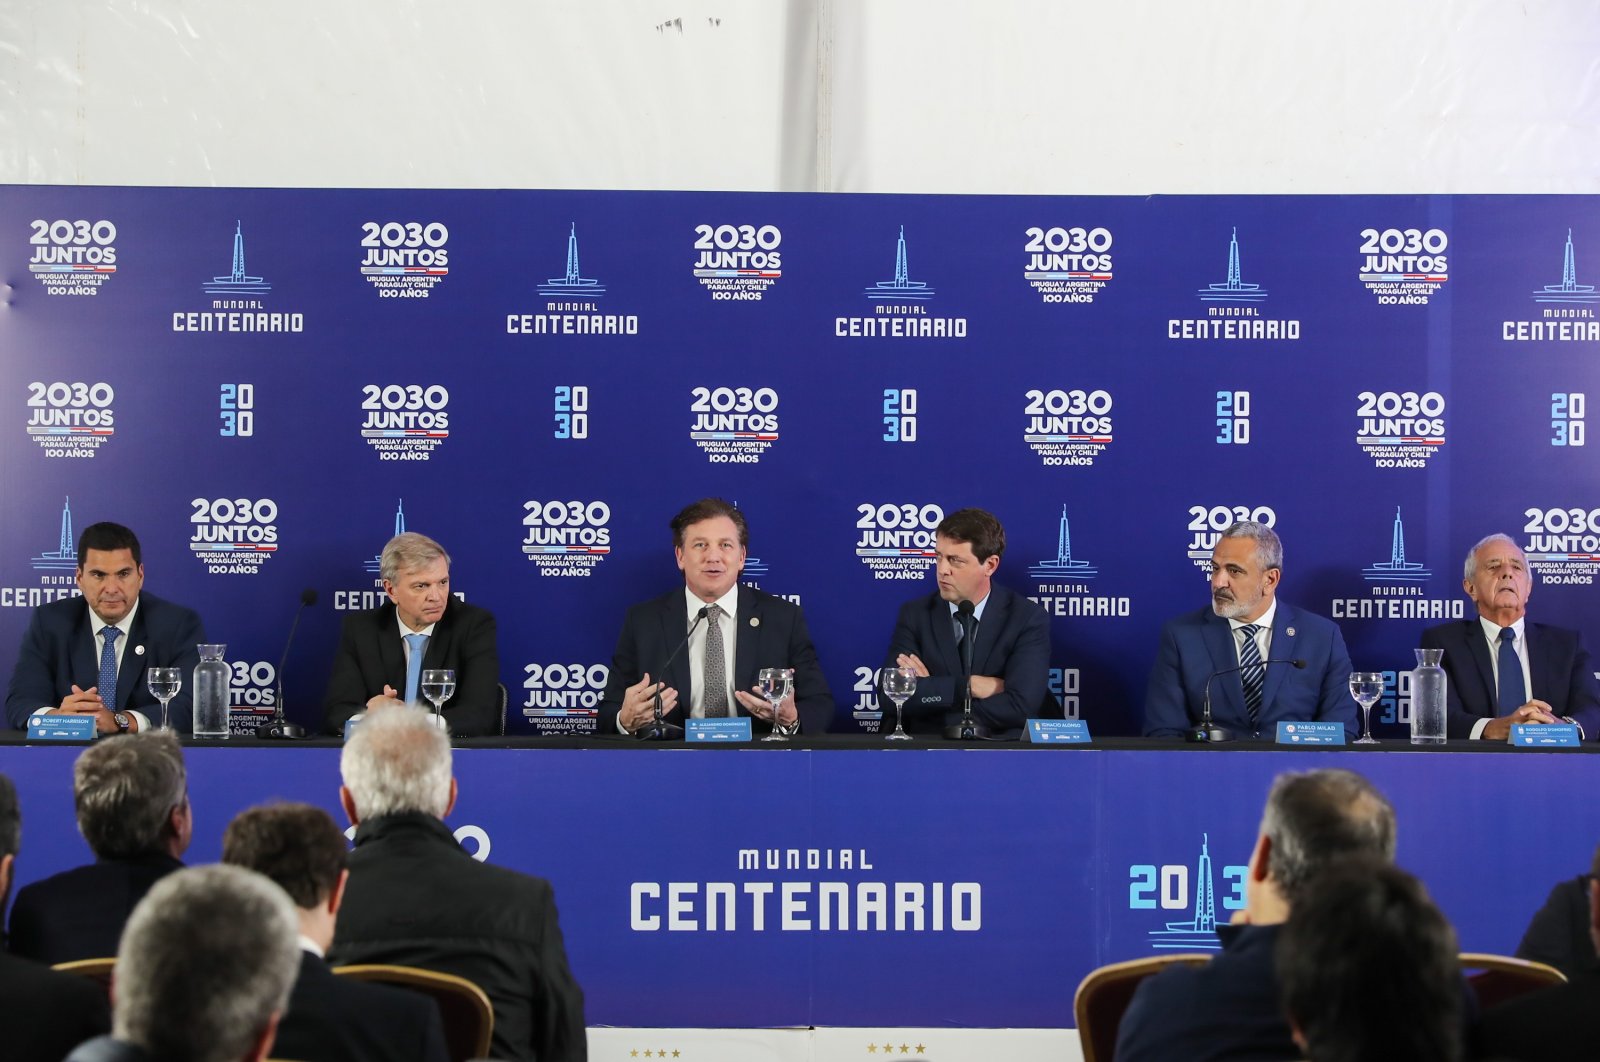 CONMEBOL and football officials from Argentina, Chile, Uruguay and Paraguay at a press conference for the FIFA World Cup of 2030, Montevideo, Uruguay, Aug. 2, 2022. (EPA Photo)